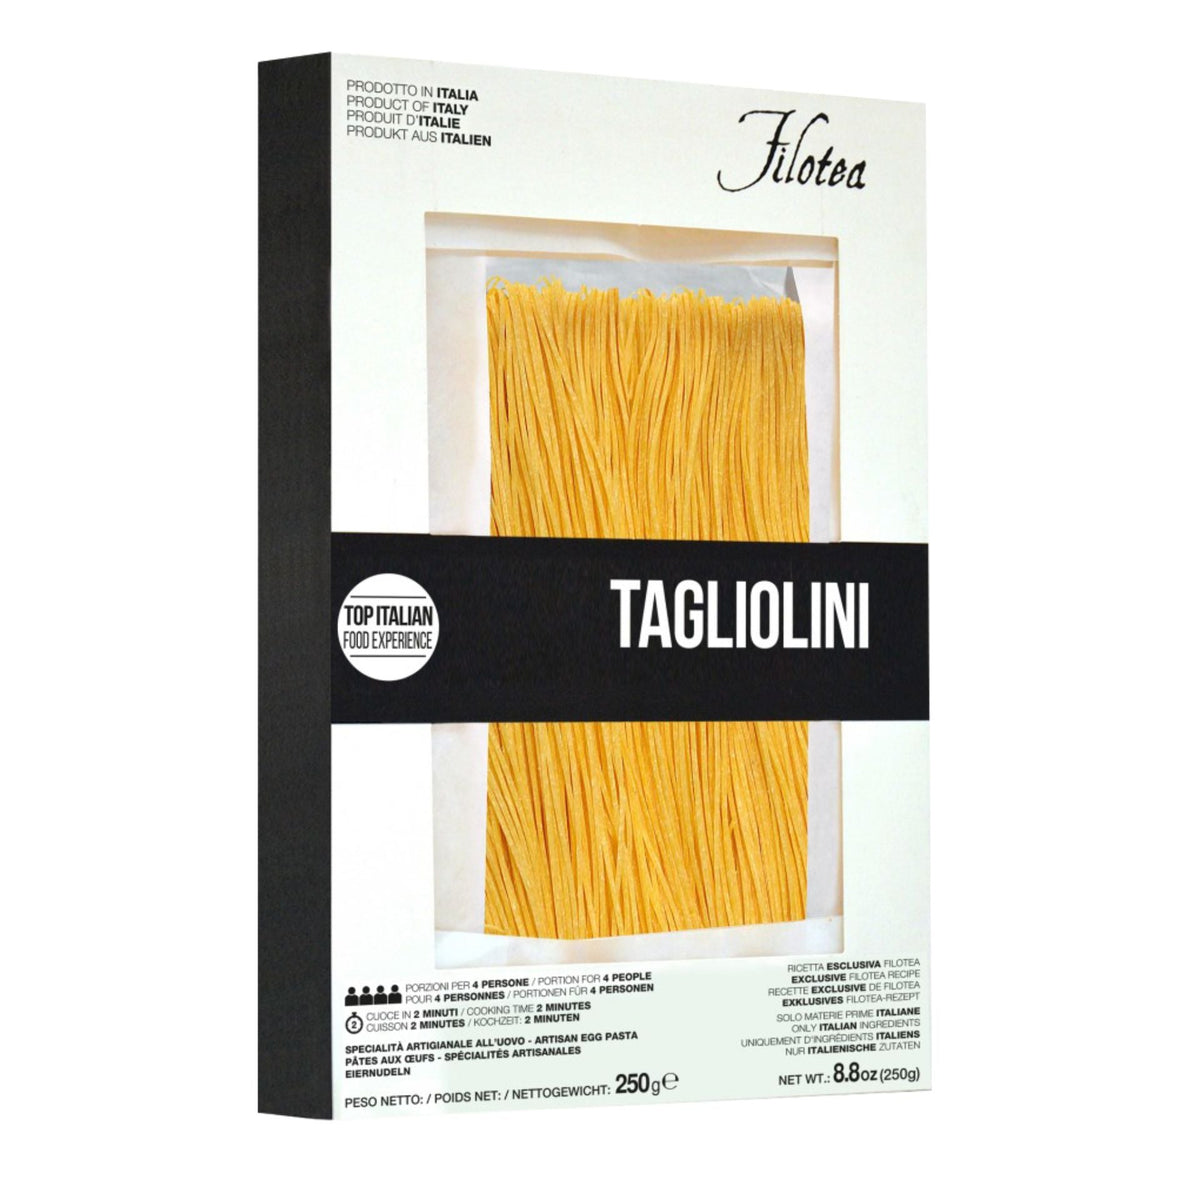 Filotea Tagliolini Artisan Egg Pasta 250g  | Imported and distributed in the UK by Just Gourmet Foods